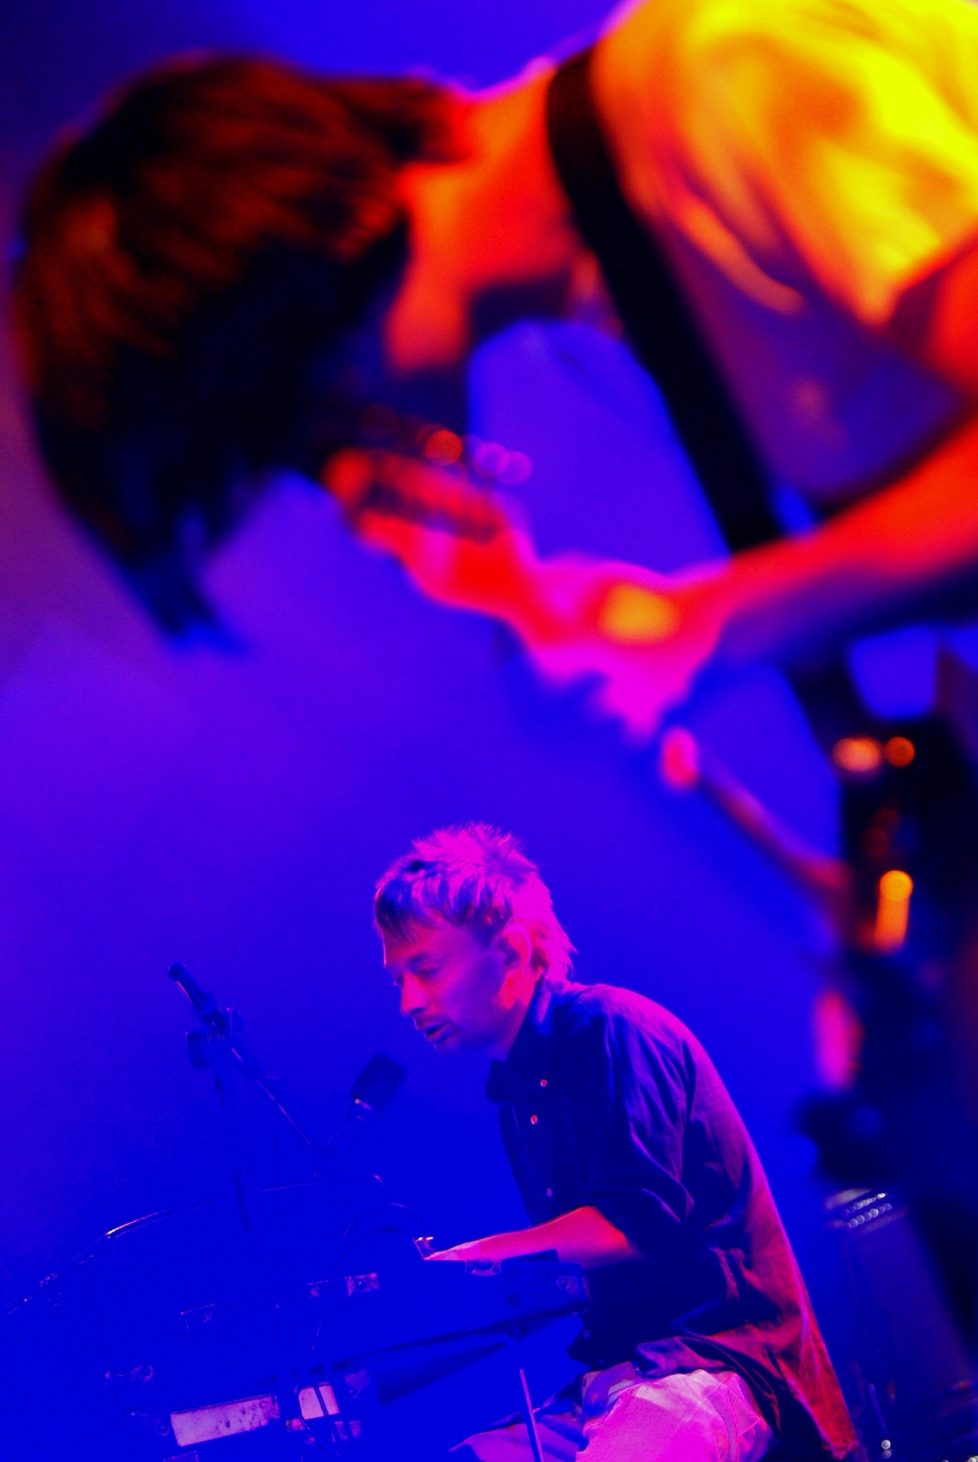 Thom Yorke, left, singer and Jonathan Greenwood, right, guitarist of british rock group Readiohead performs on Stravinsky stage, during the 37th Montreux Jazz Festival, in Montreux, Switzerland, Saturday, July 5, 2003. (KEYSTONE/Fabrice Coffrini)